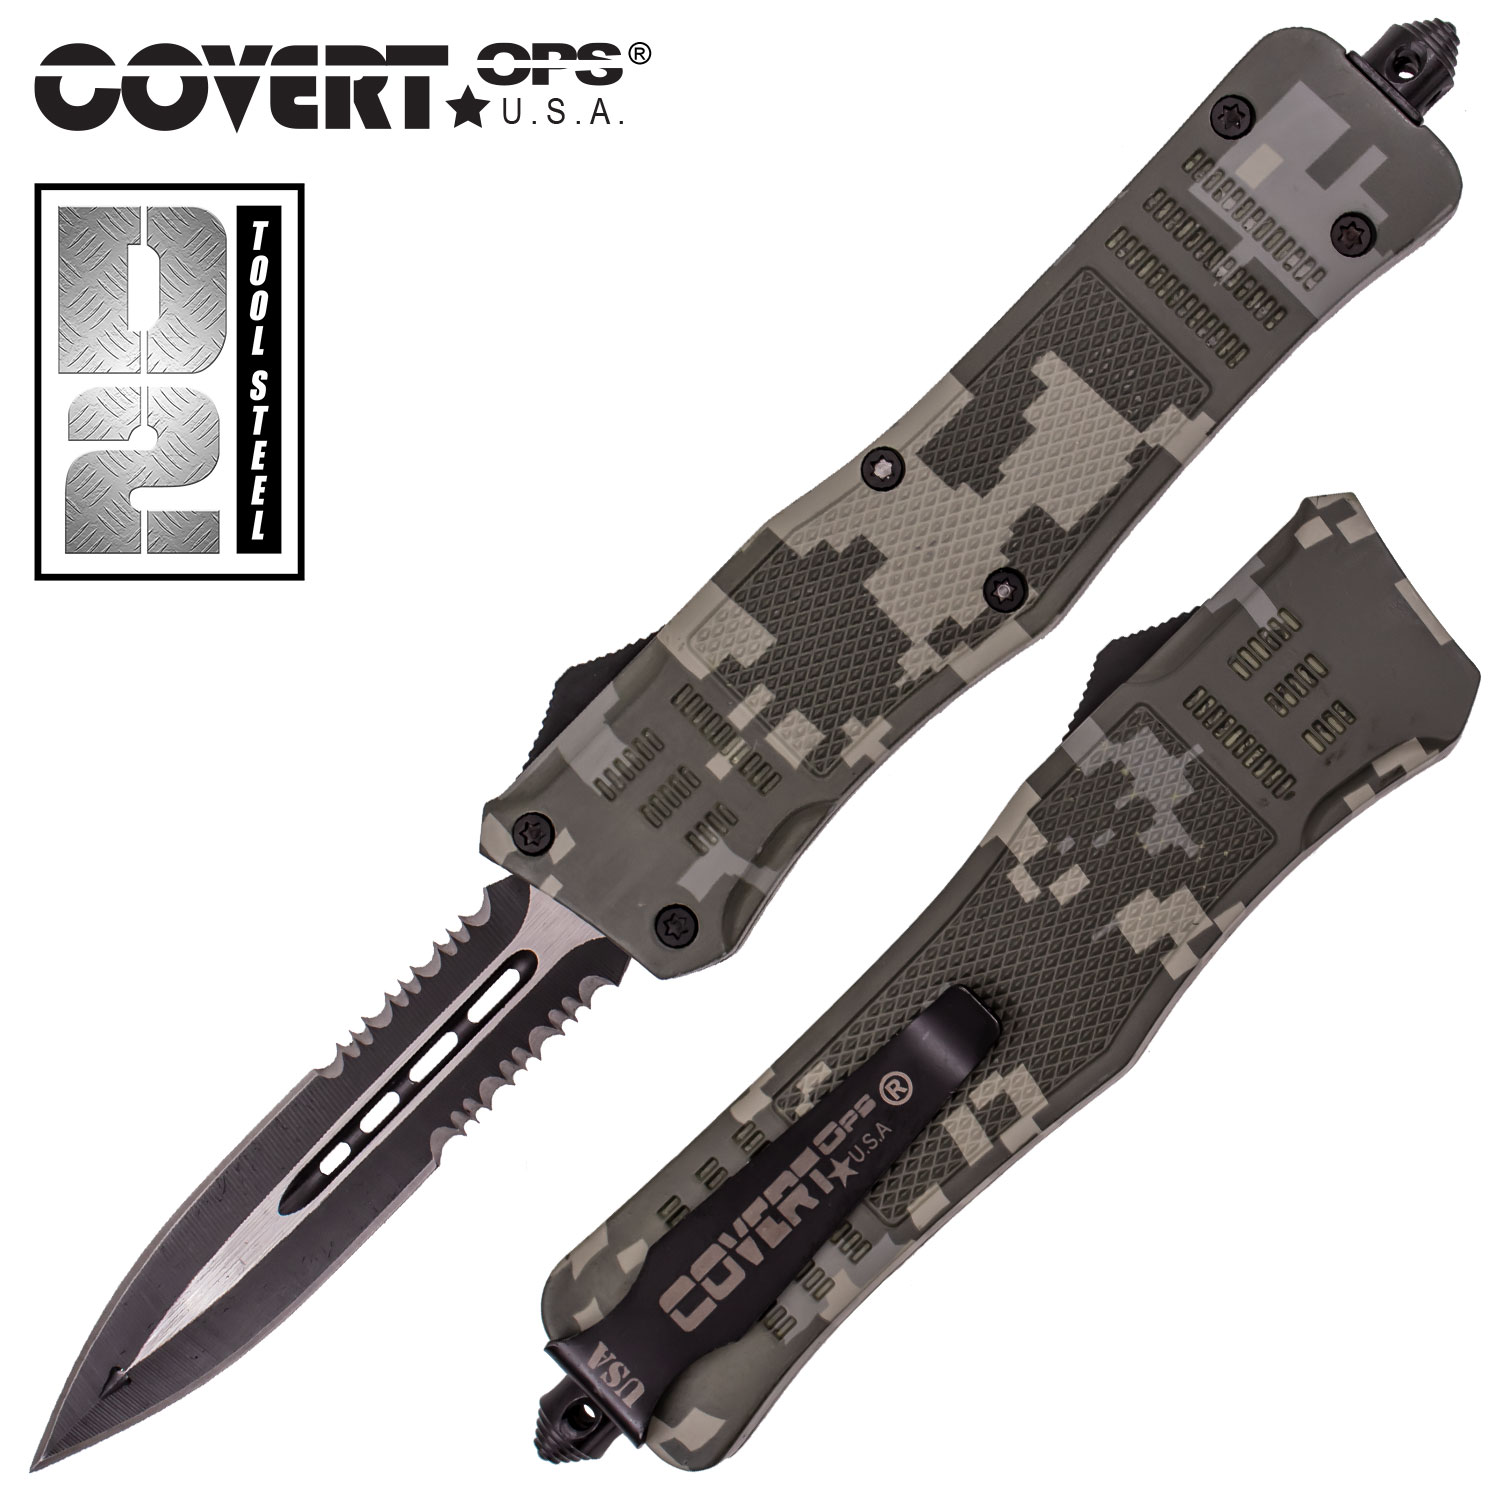 Covert OPS USA OTF Automatic Knife 9 inch Camo D2 Steel Blade DEdge